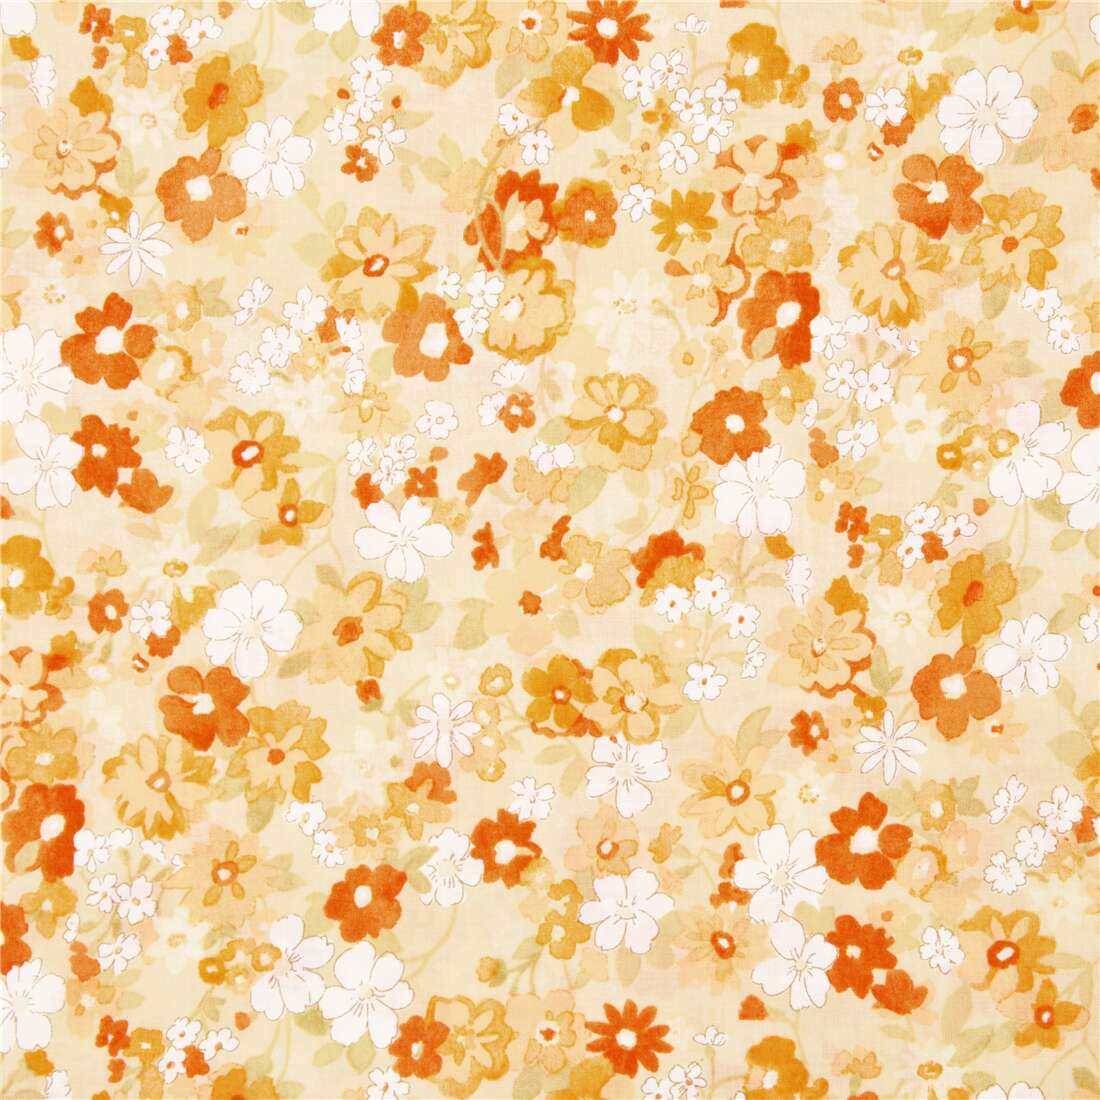 floral orange cotton lawn fabric with orange and white tiny blooms Japanese  - modeS4u